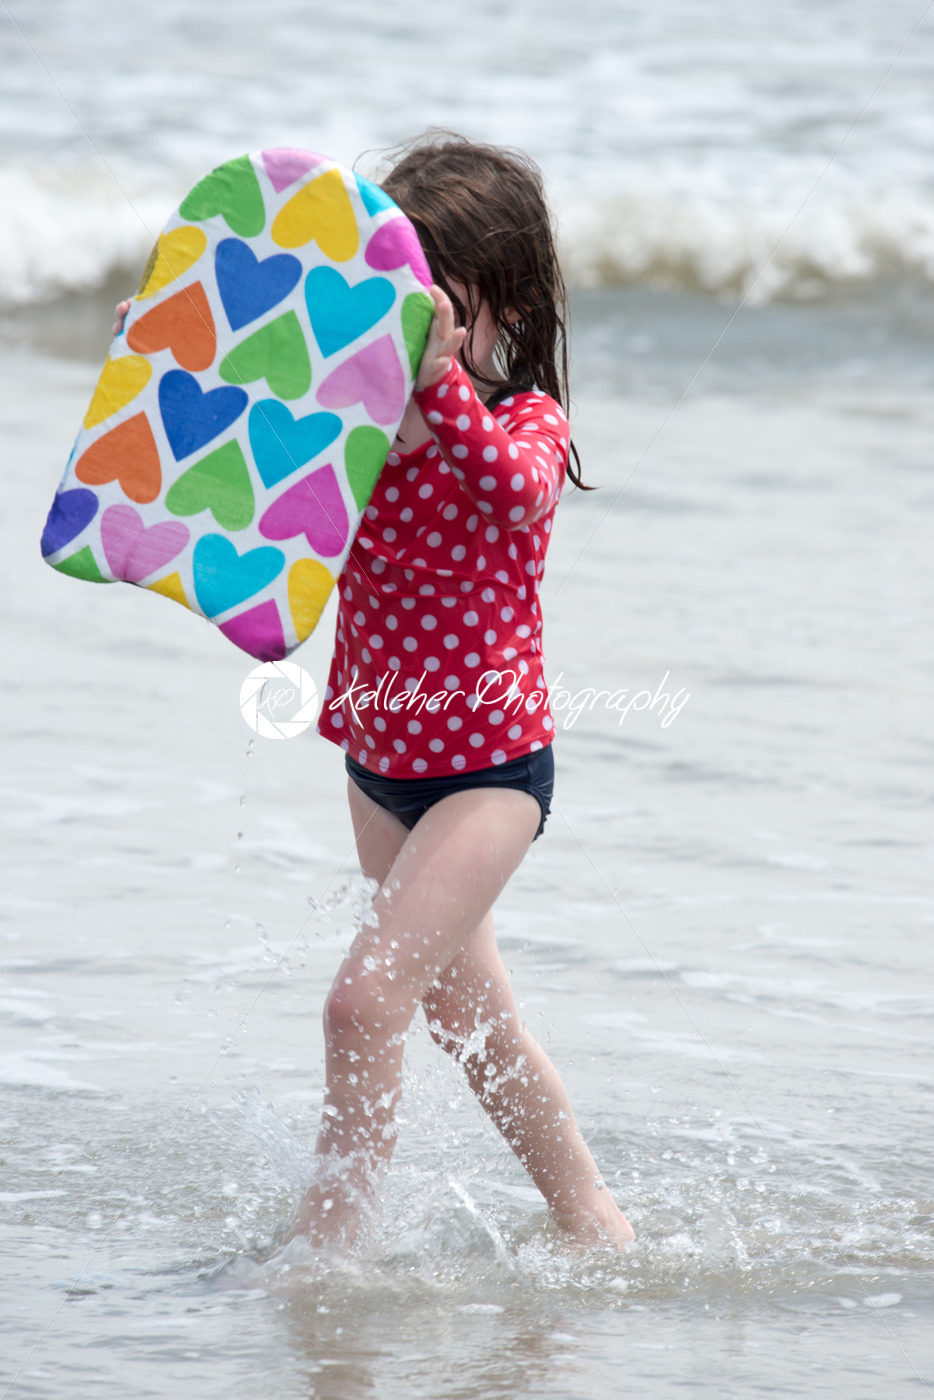 Girl coming out of the ocean waves with a boogy board - Kelleher Photography Store